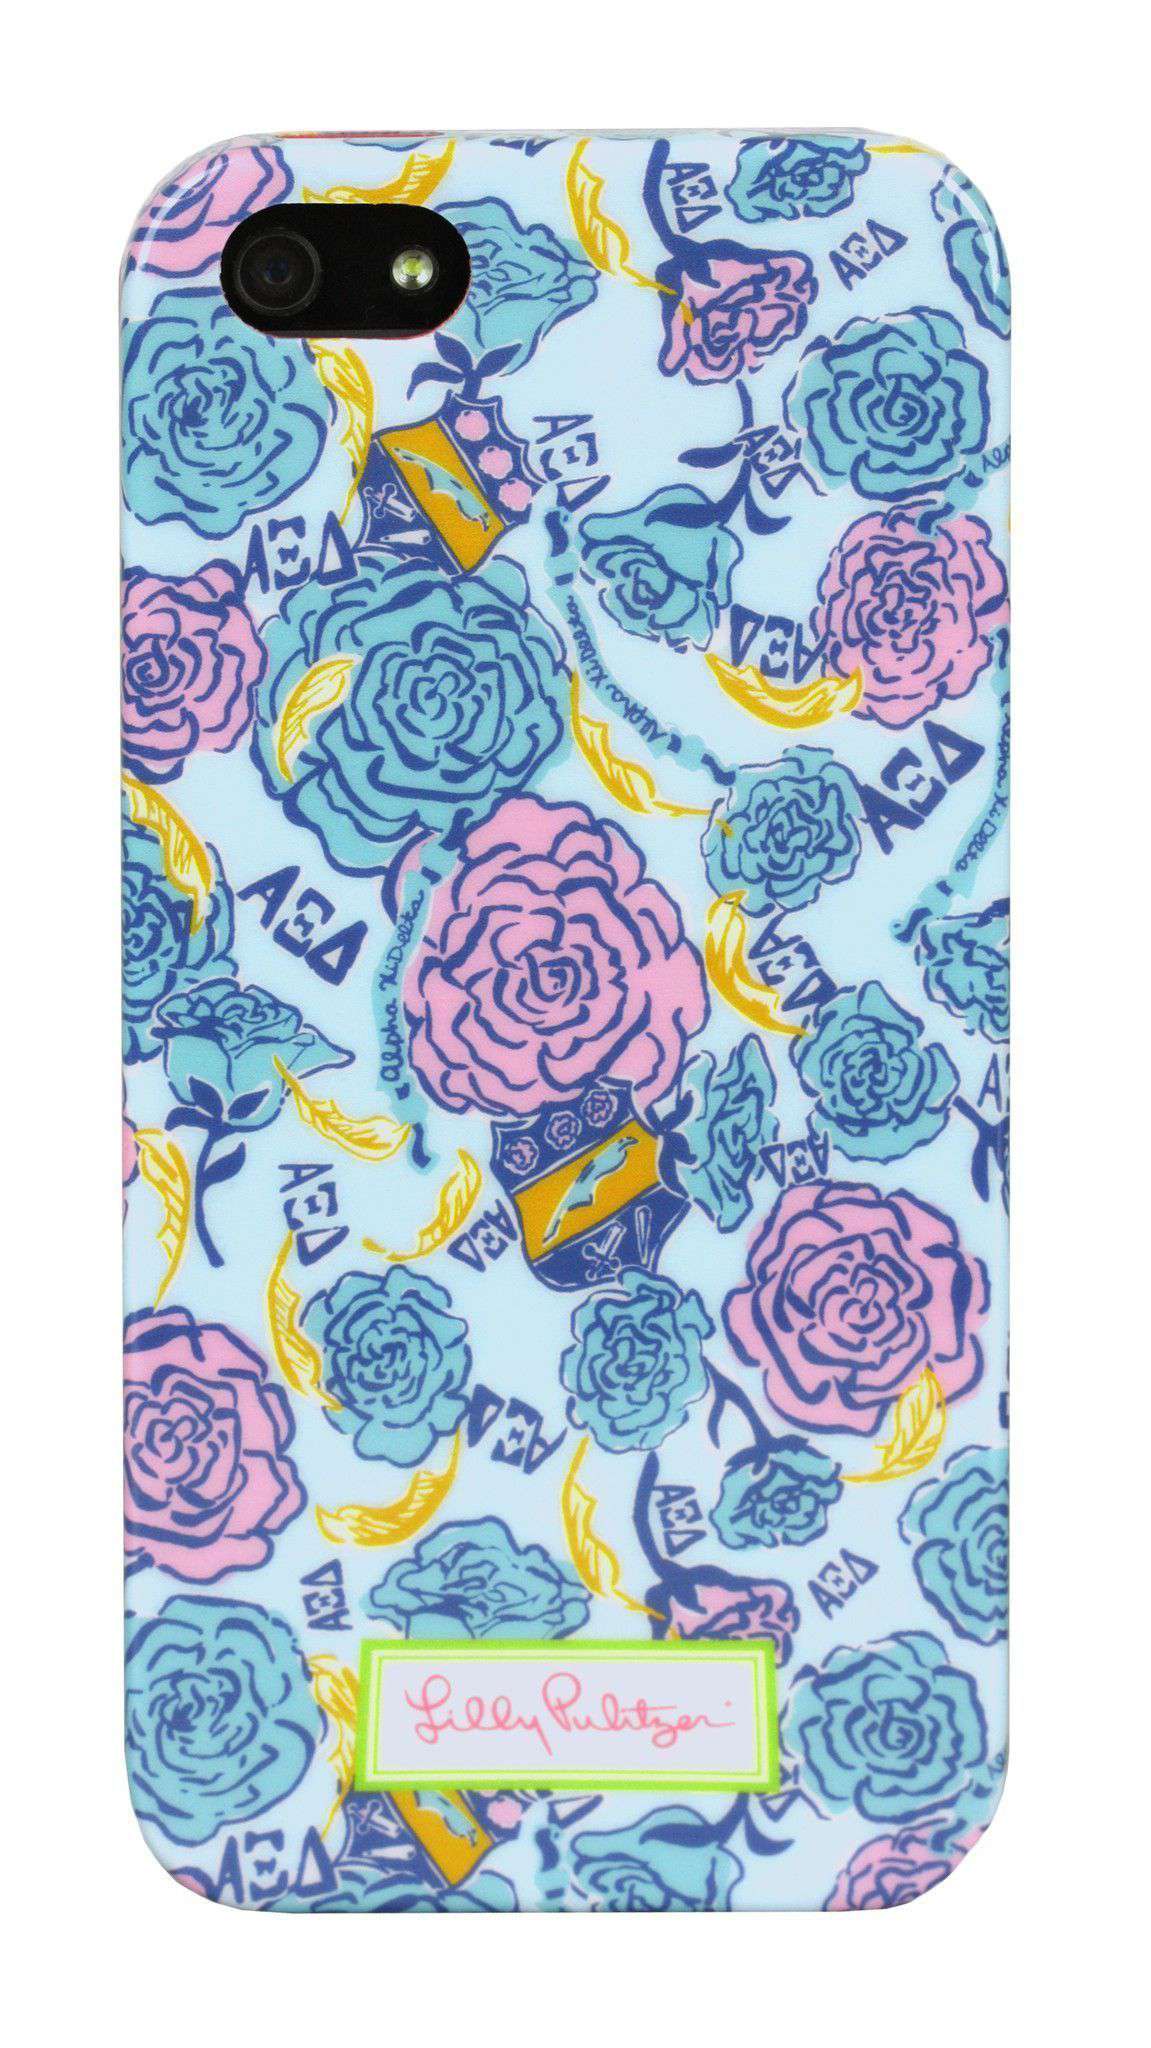 Alpha Xi Delta iPhone 5/5s Cover by Lilly Pulitzer - Country Club Prep